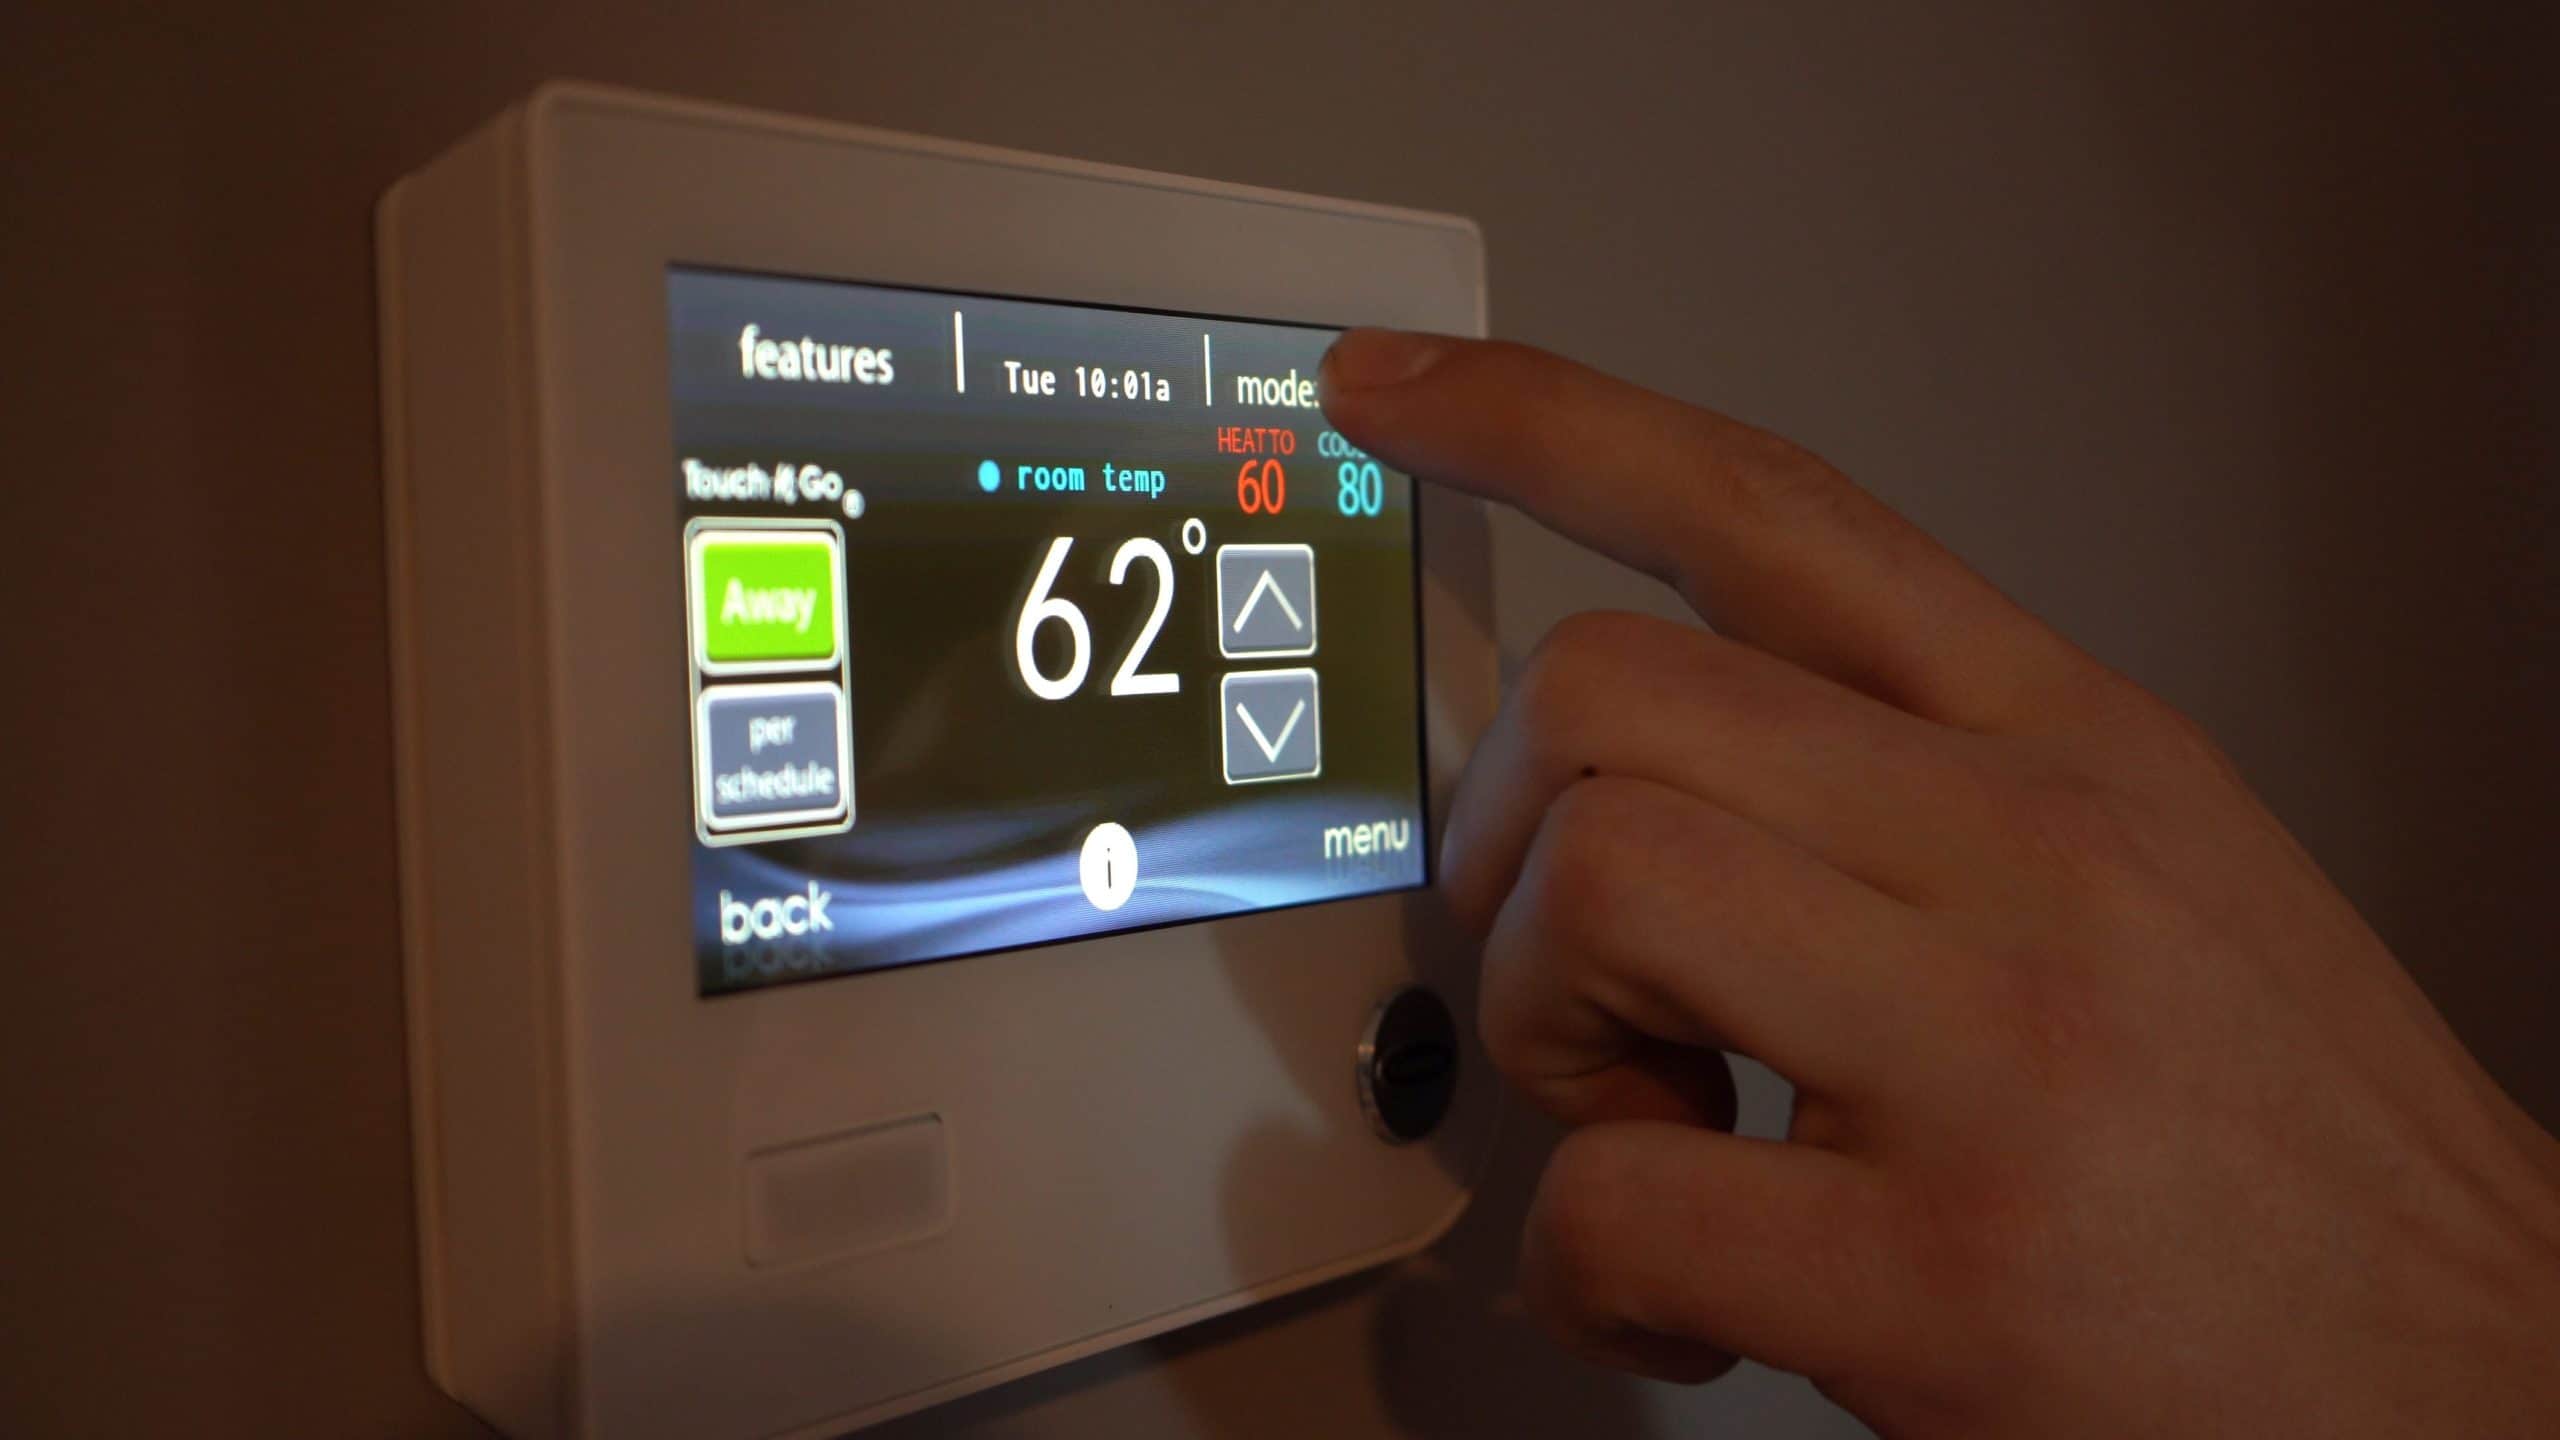 13 Benefits of Installing a Smart Thermostat in Your Home